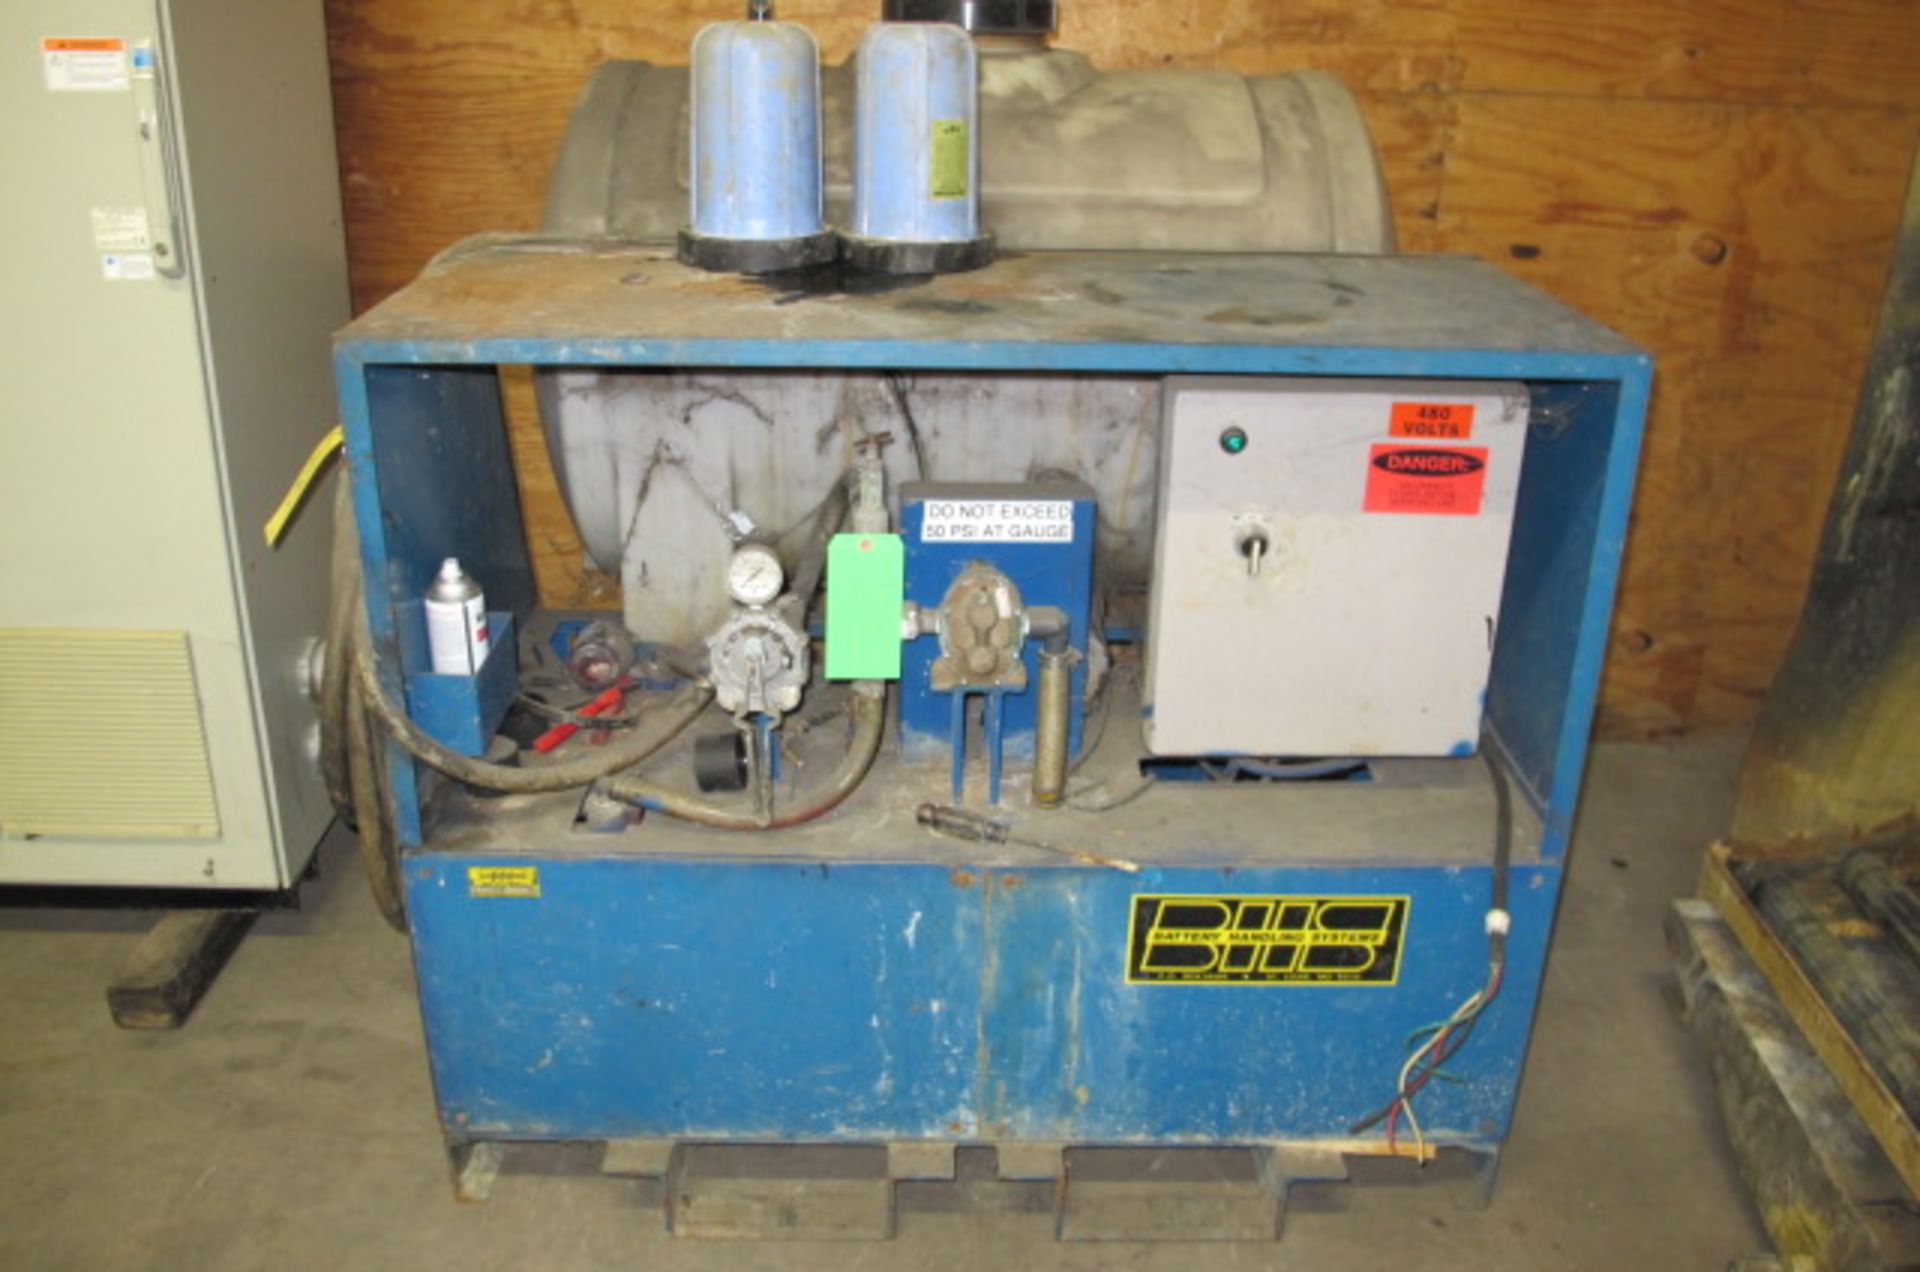 BATTERY HANDLING SYSTEM BATTERY POWER WASHER 7490 OH 120, Lyons, Ohio 43523 - all Gaylord plastic